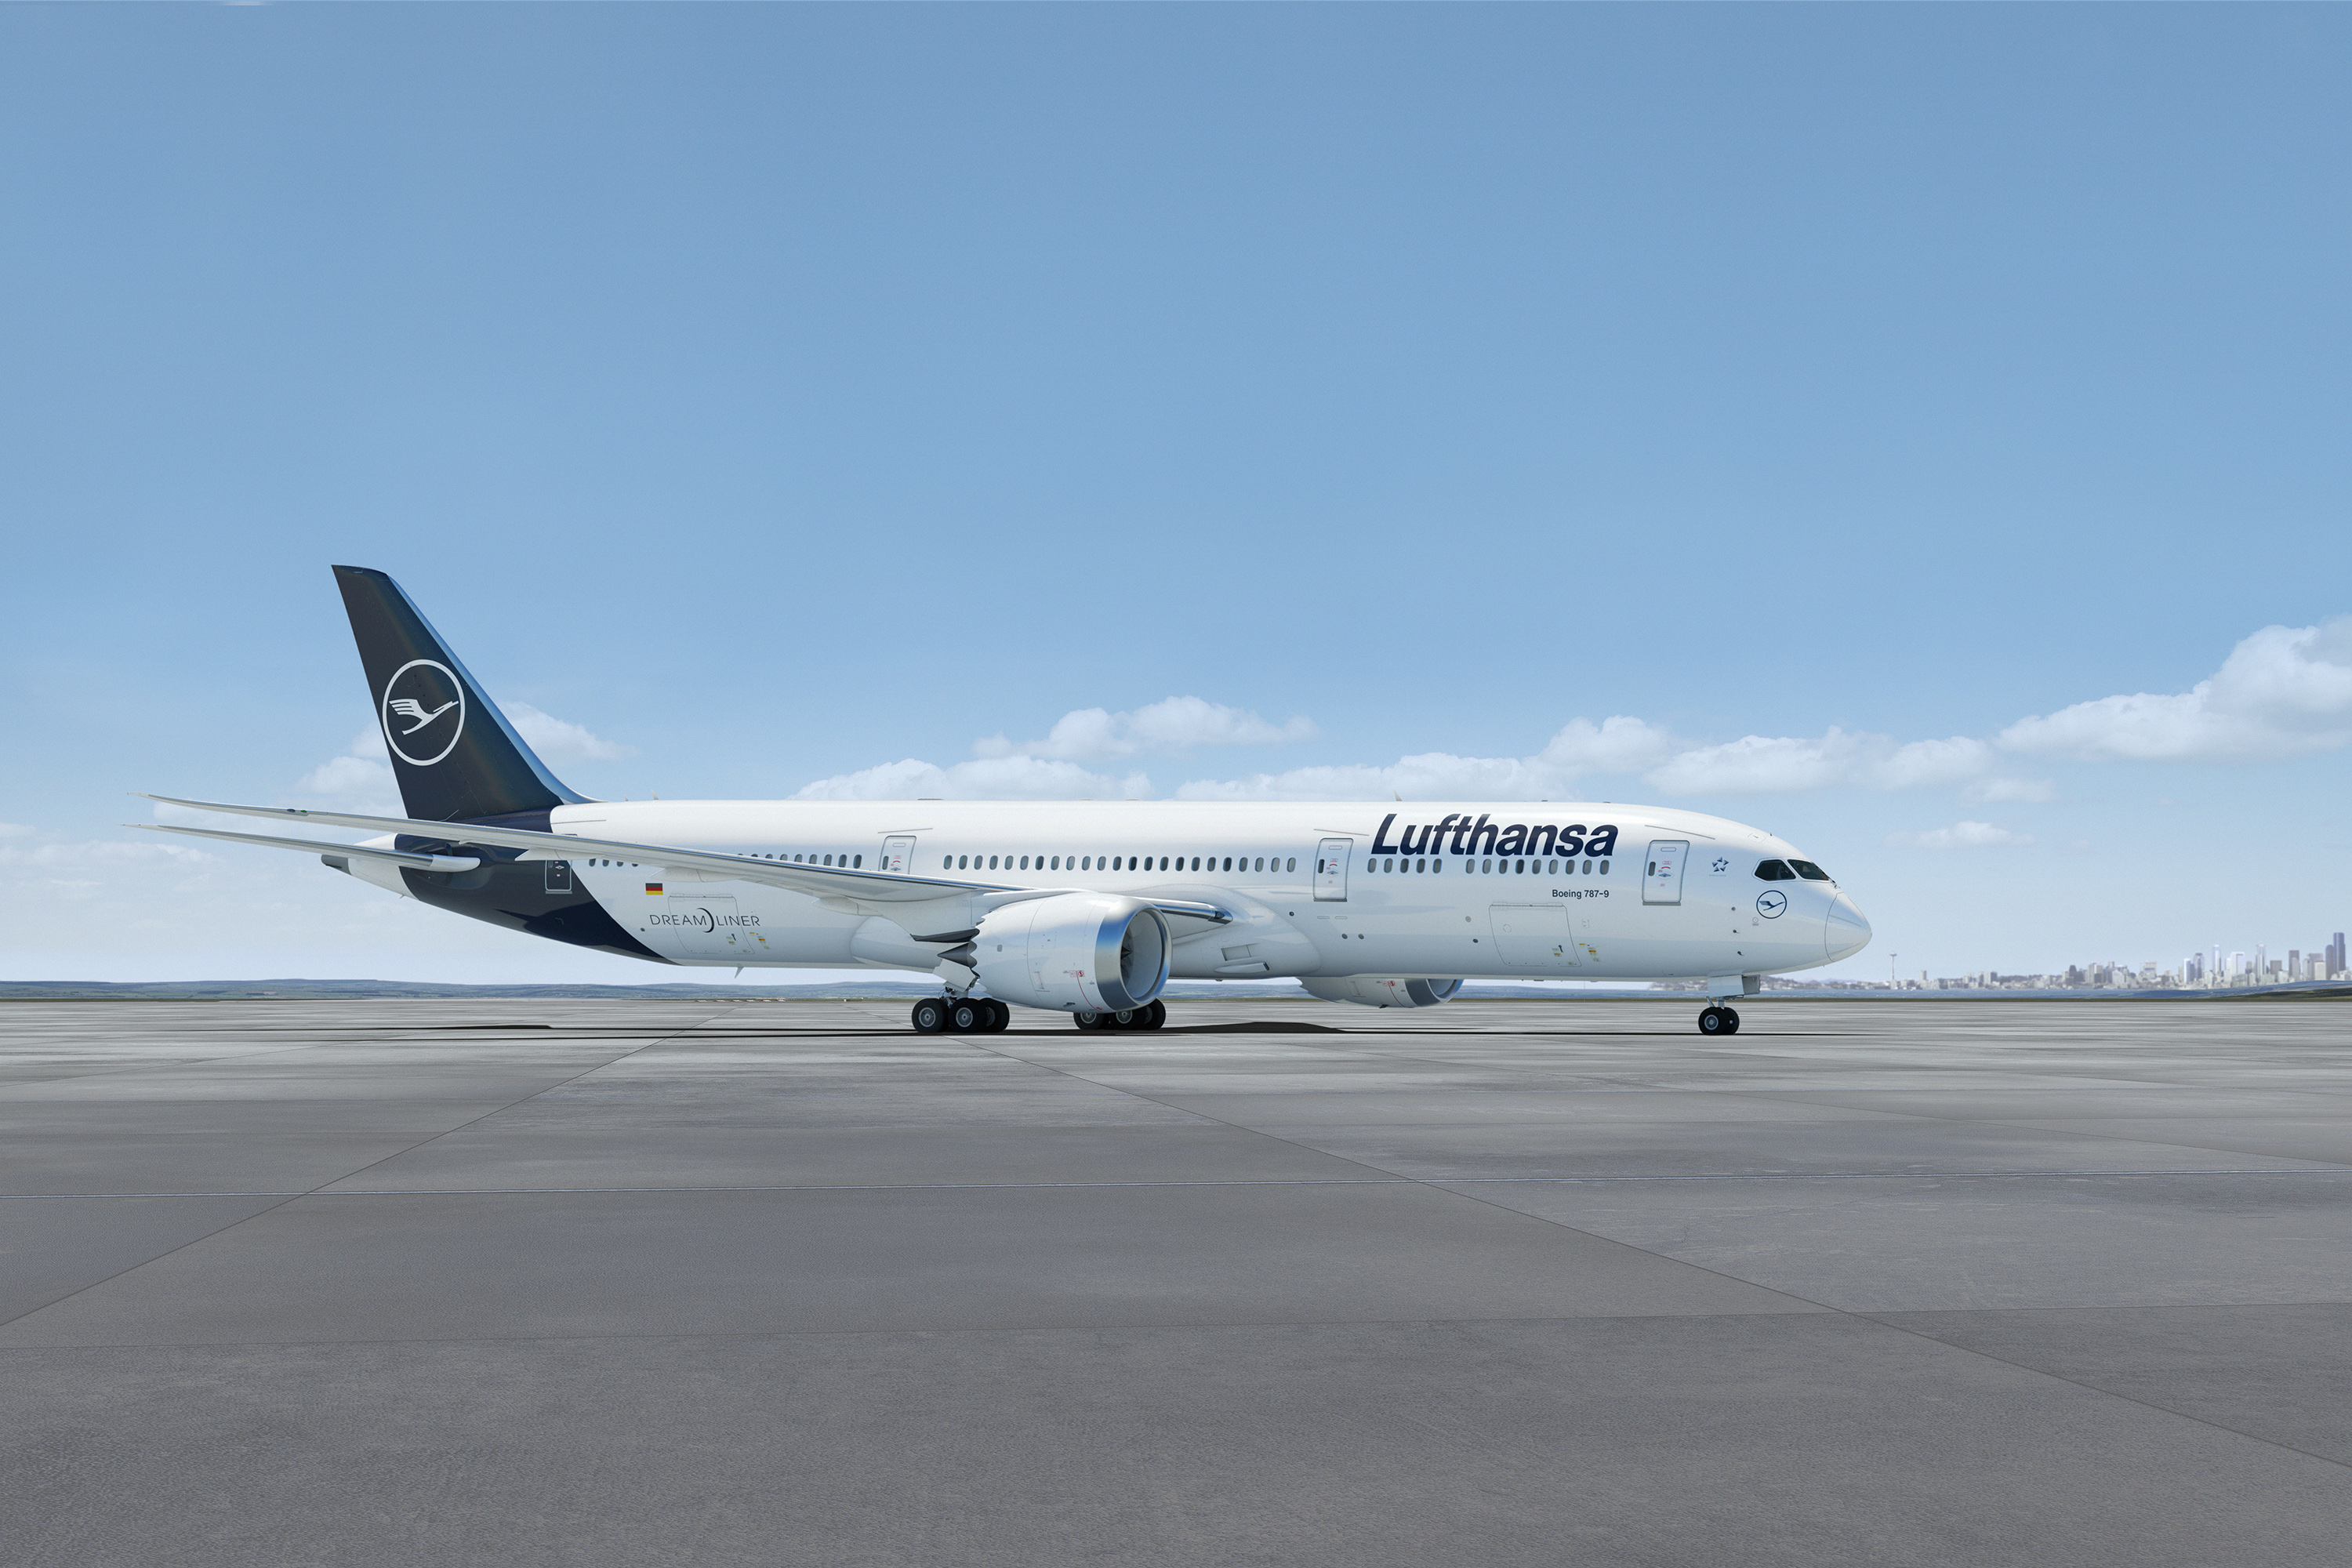 Lufthansa Group orders 40 state-of-the-art long-haul aircraft